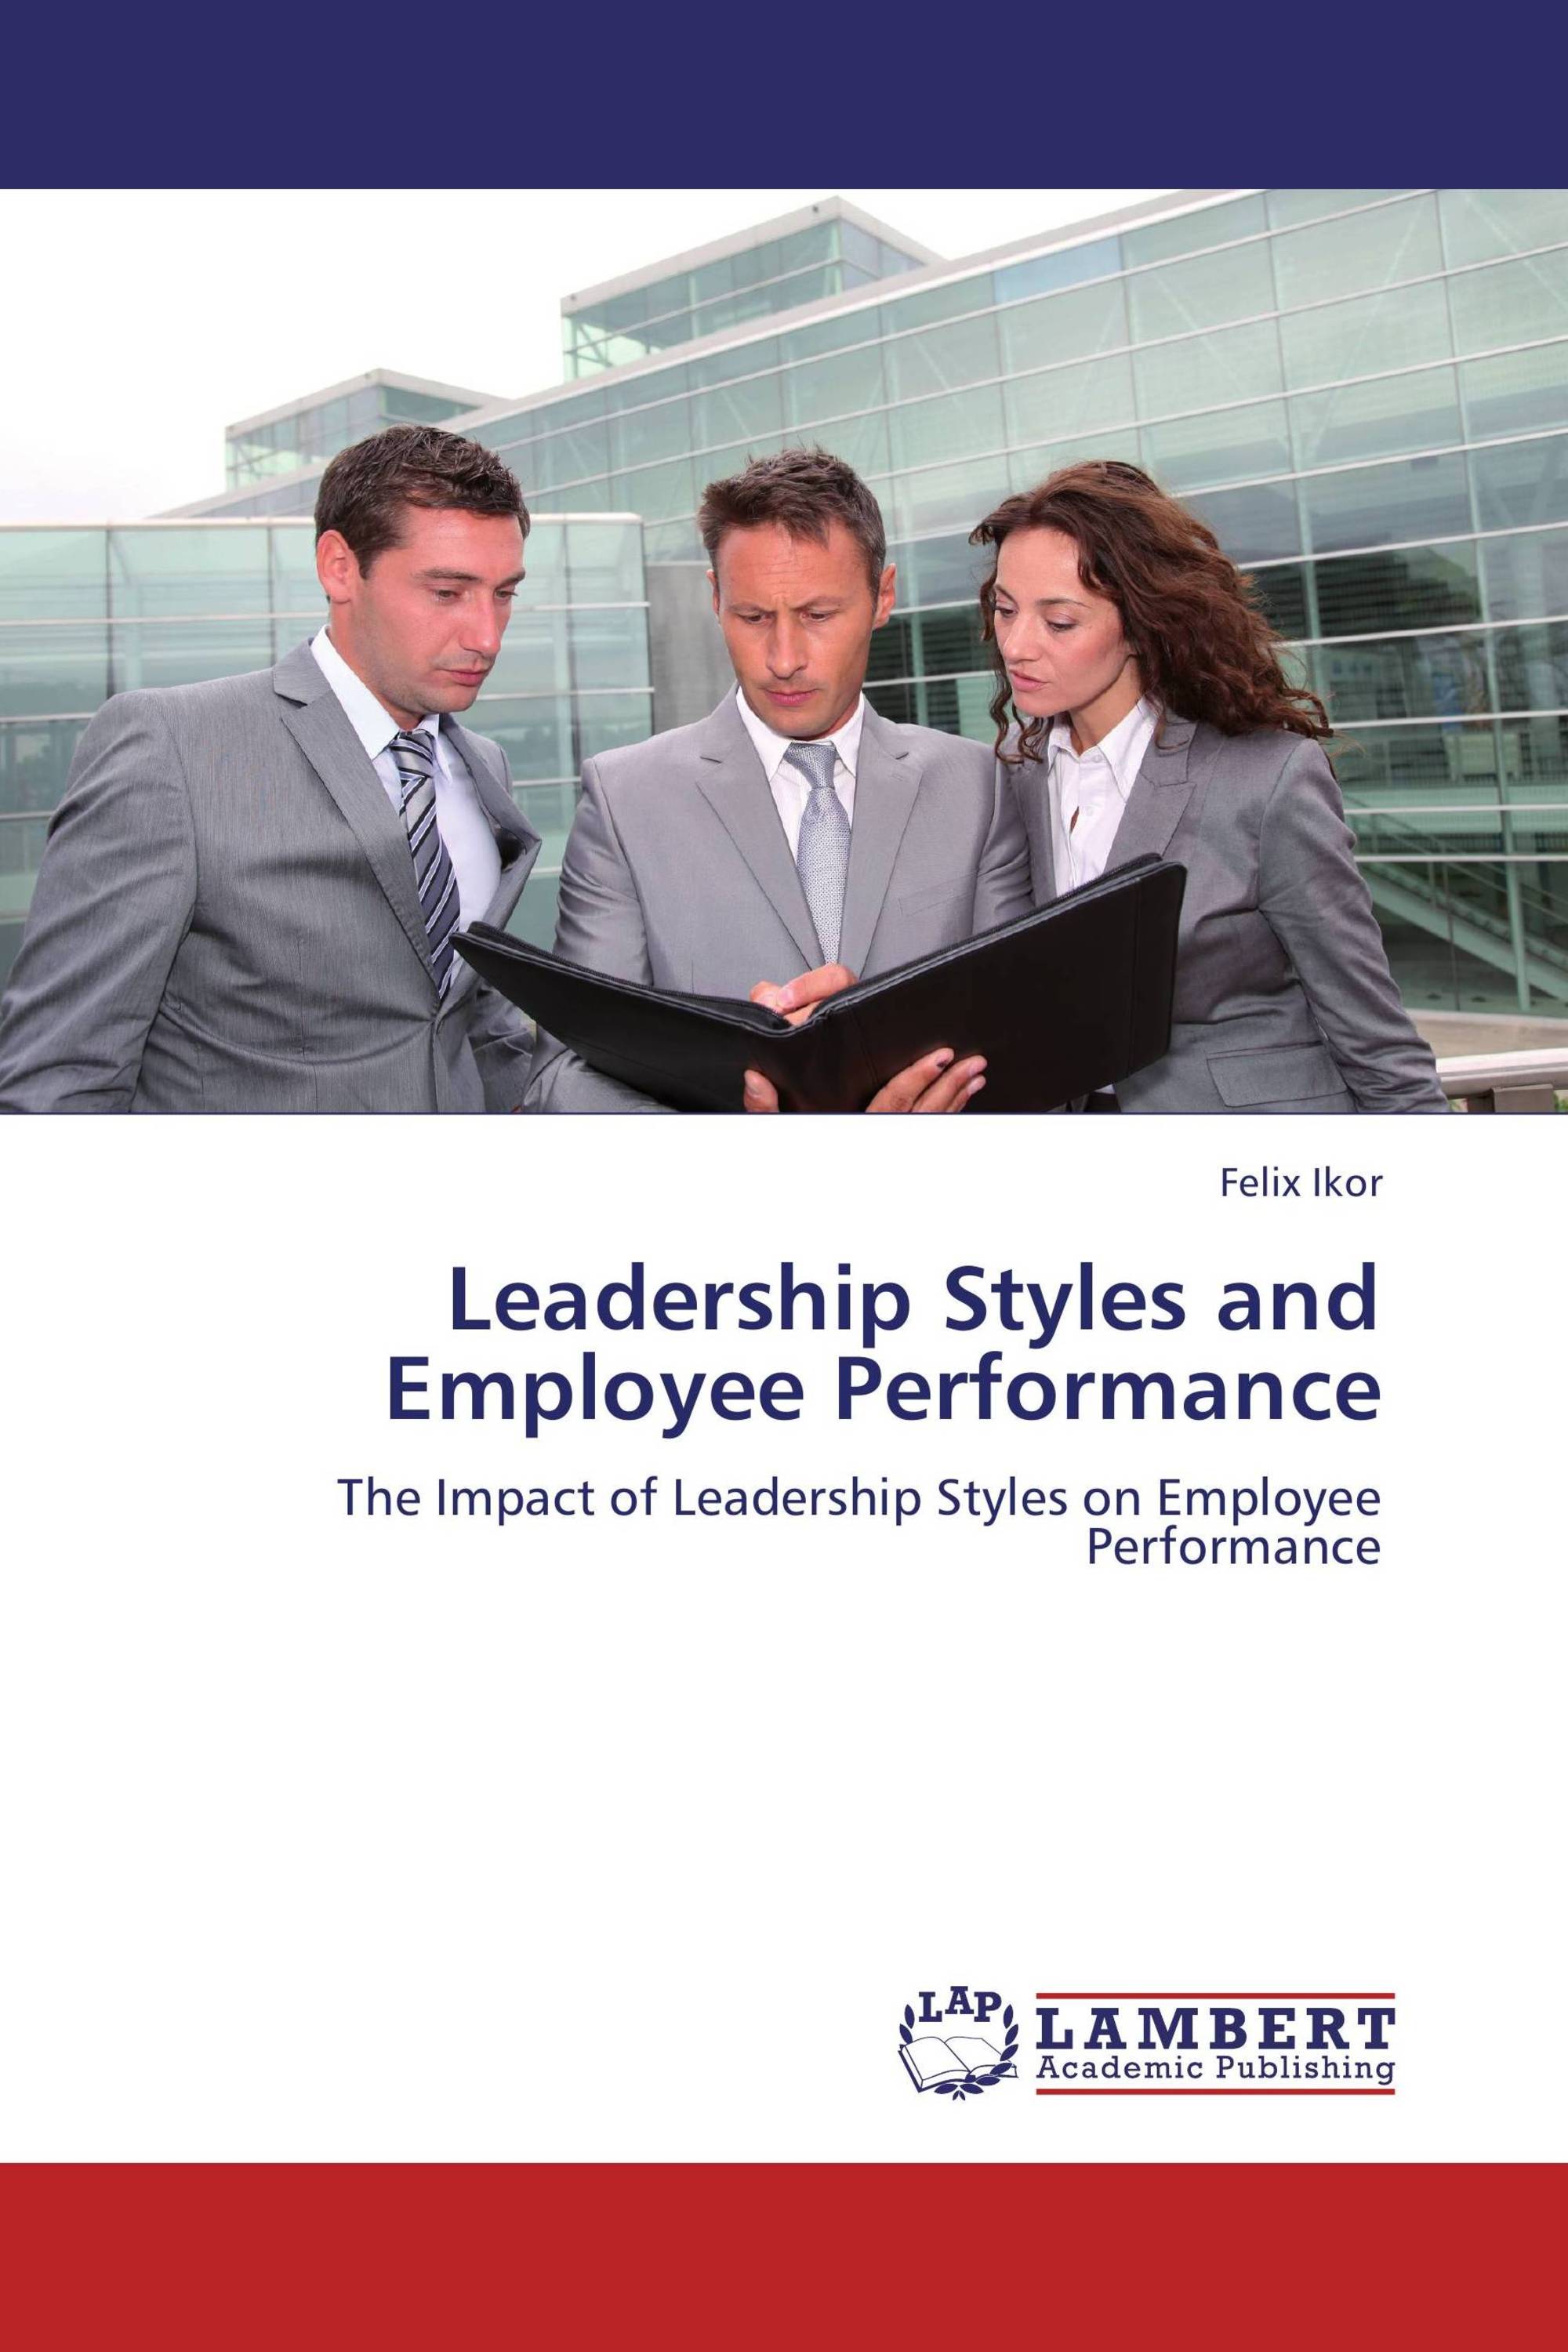 literature review on leadership style and employee performance